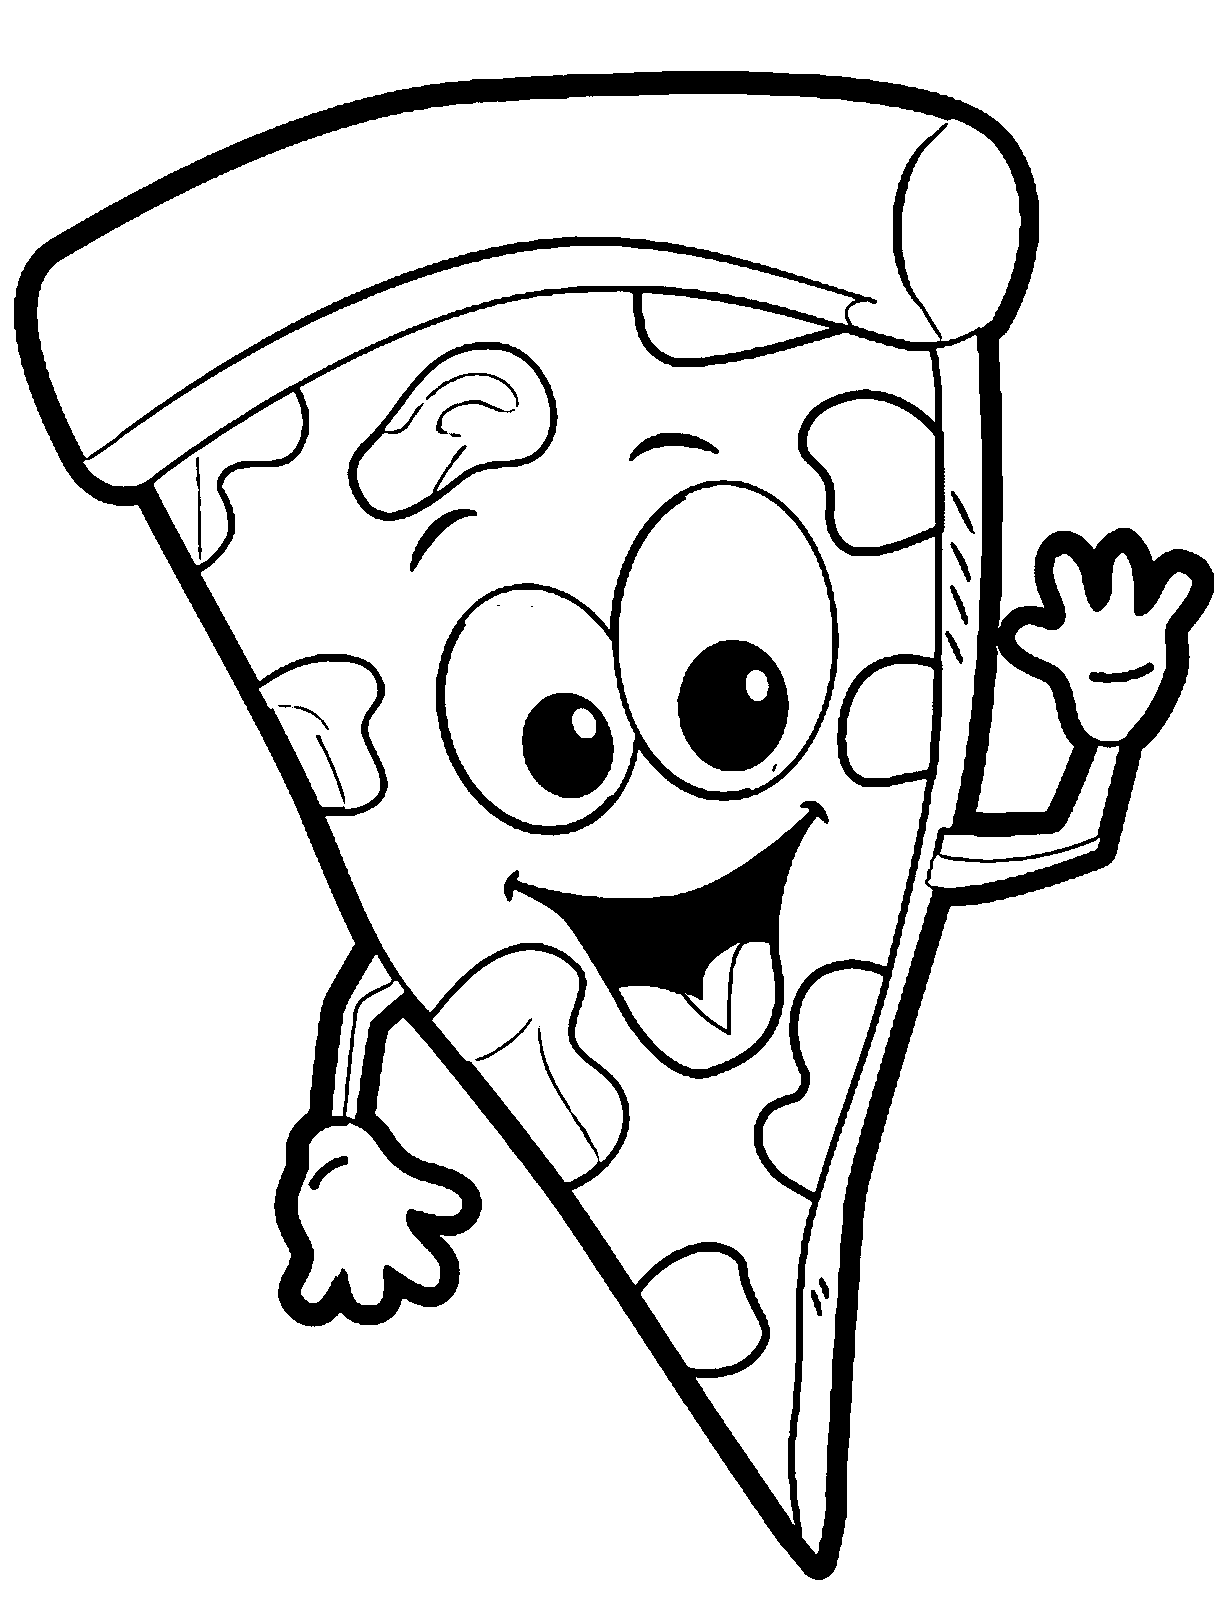 Free Pizza Coloring Pages Download Free Pizza Coloring Pages Png 